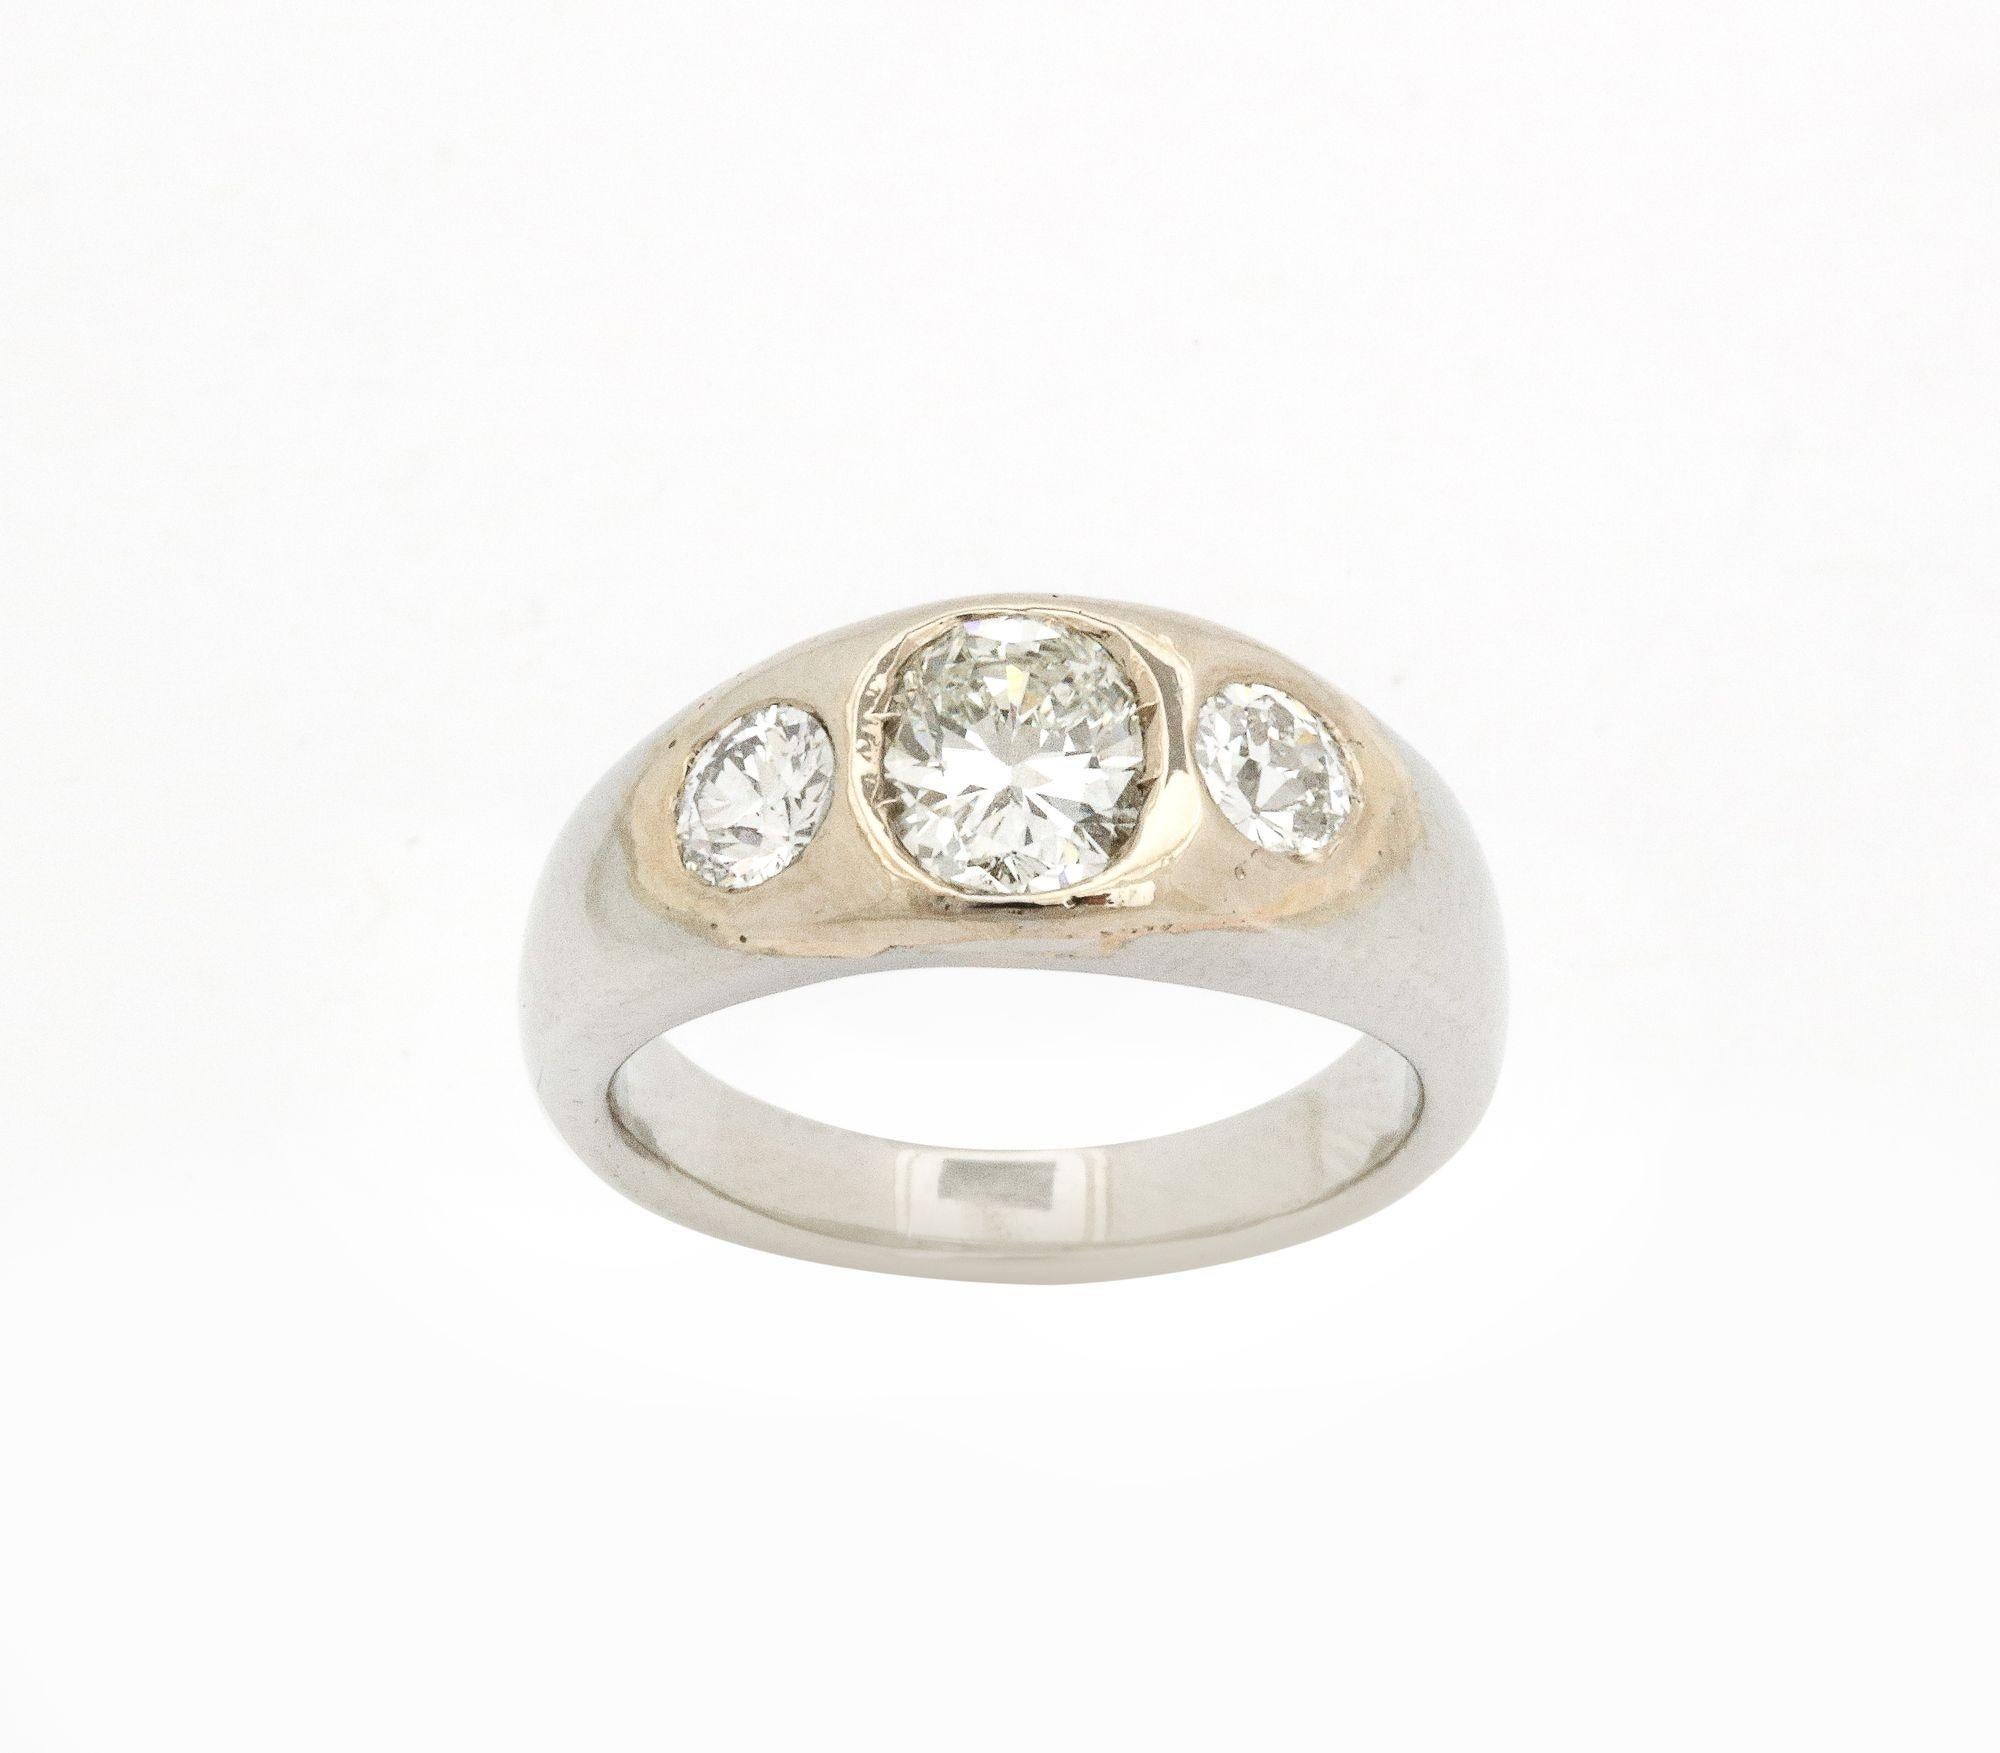 A great Diamond and White Gold and Gold Flush Mount  Ring. A larger diamond flanked by two smaller stones .80 cts set in 14k gold